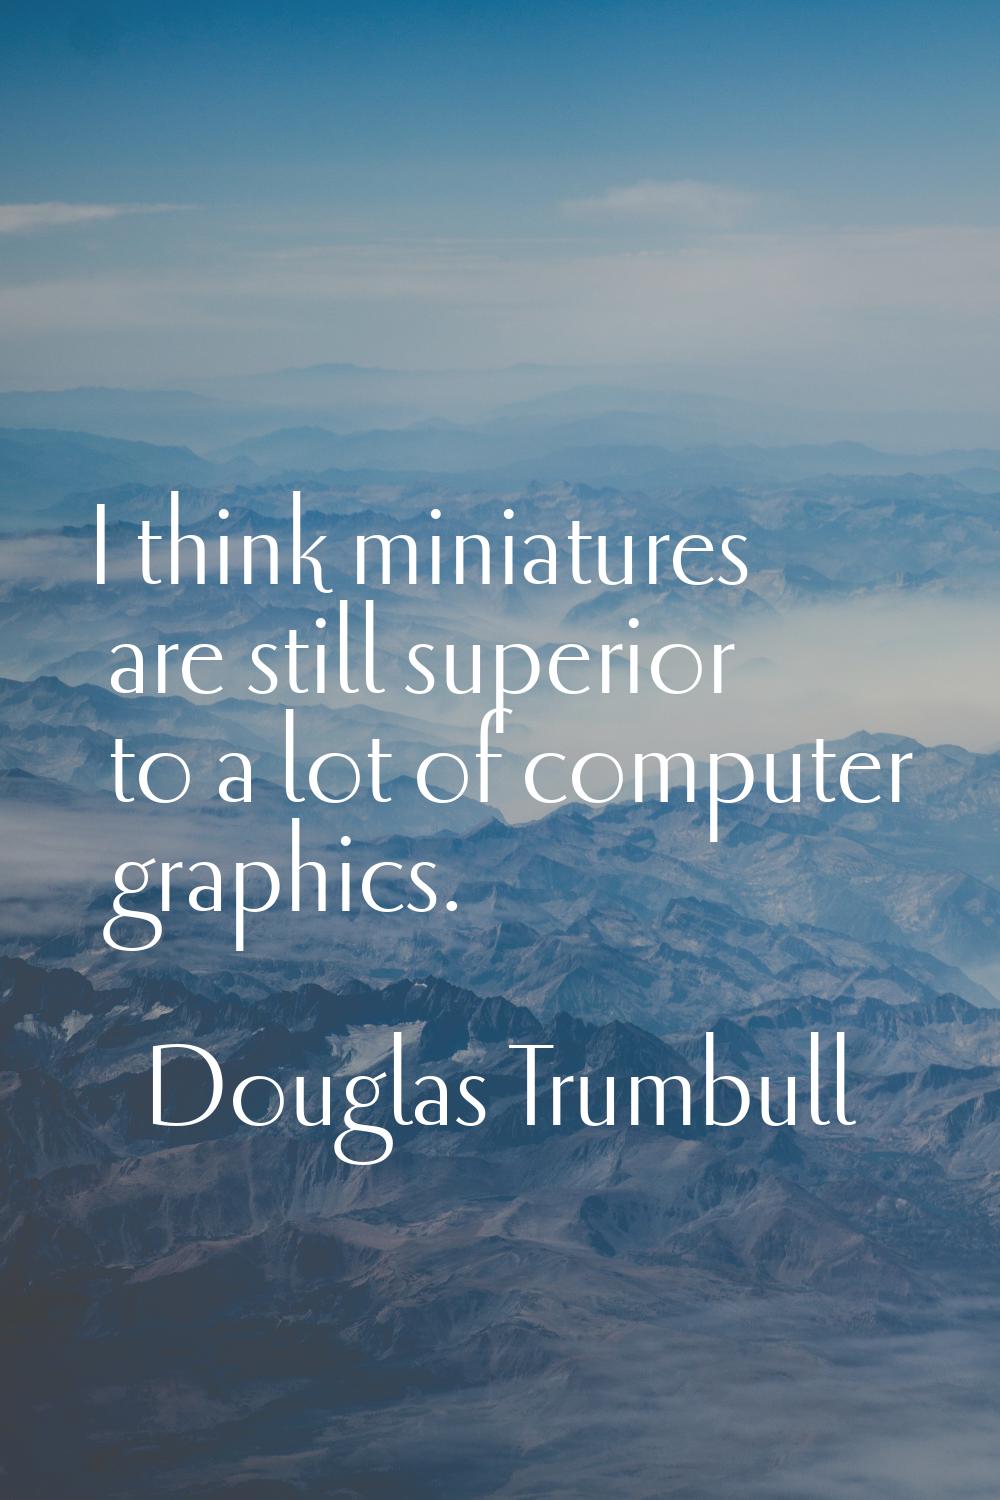 I think miniatures are still superior to a lot of computer graphics.